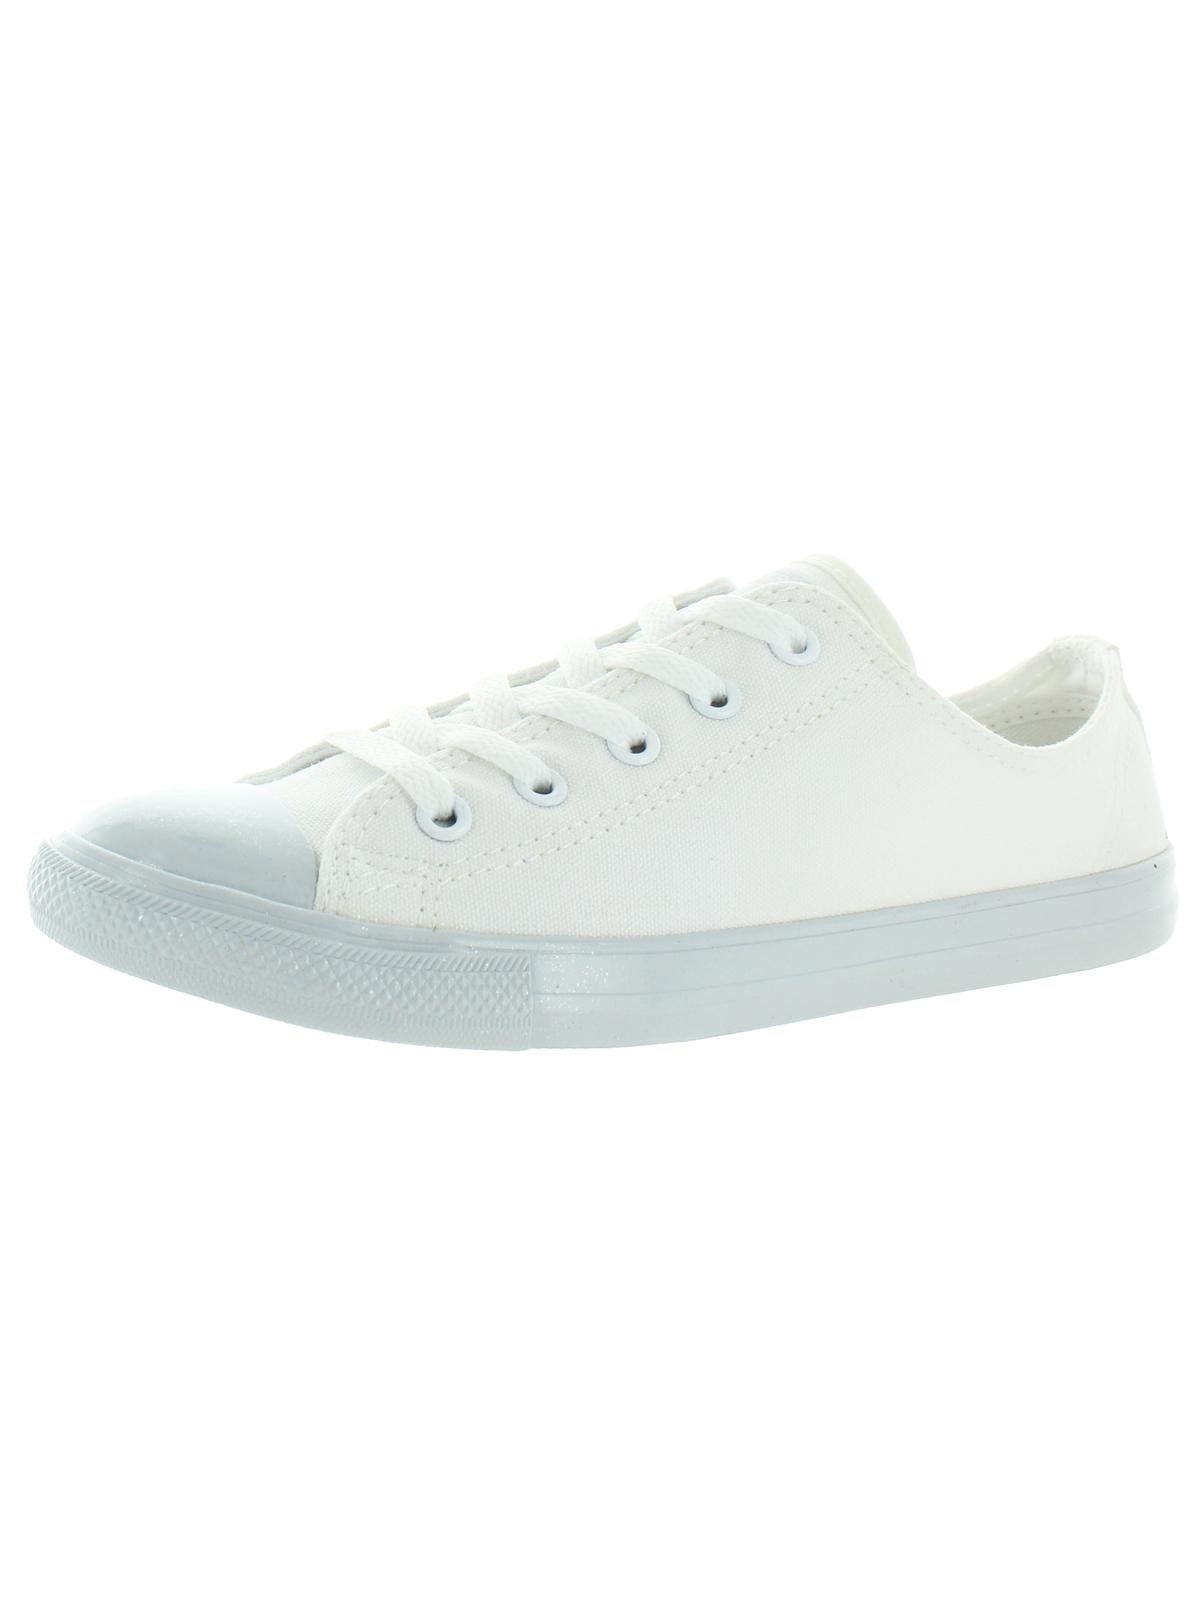 Converse Womens CTAS Dainty Ox Trainers Low Top Sneakers White 6.5 ...